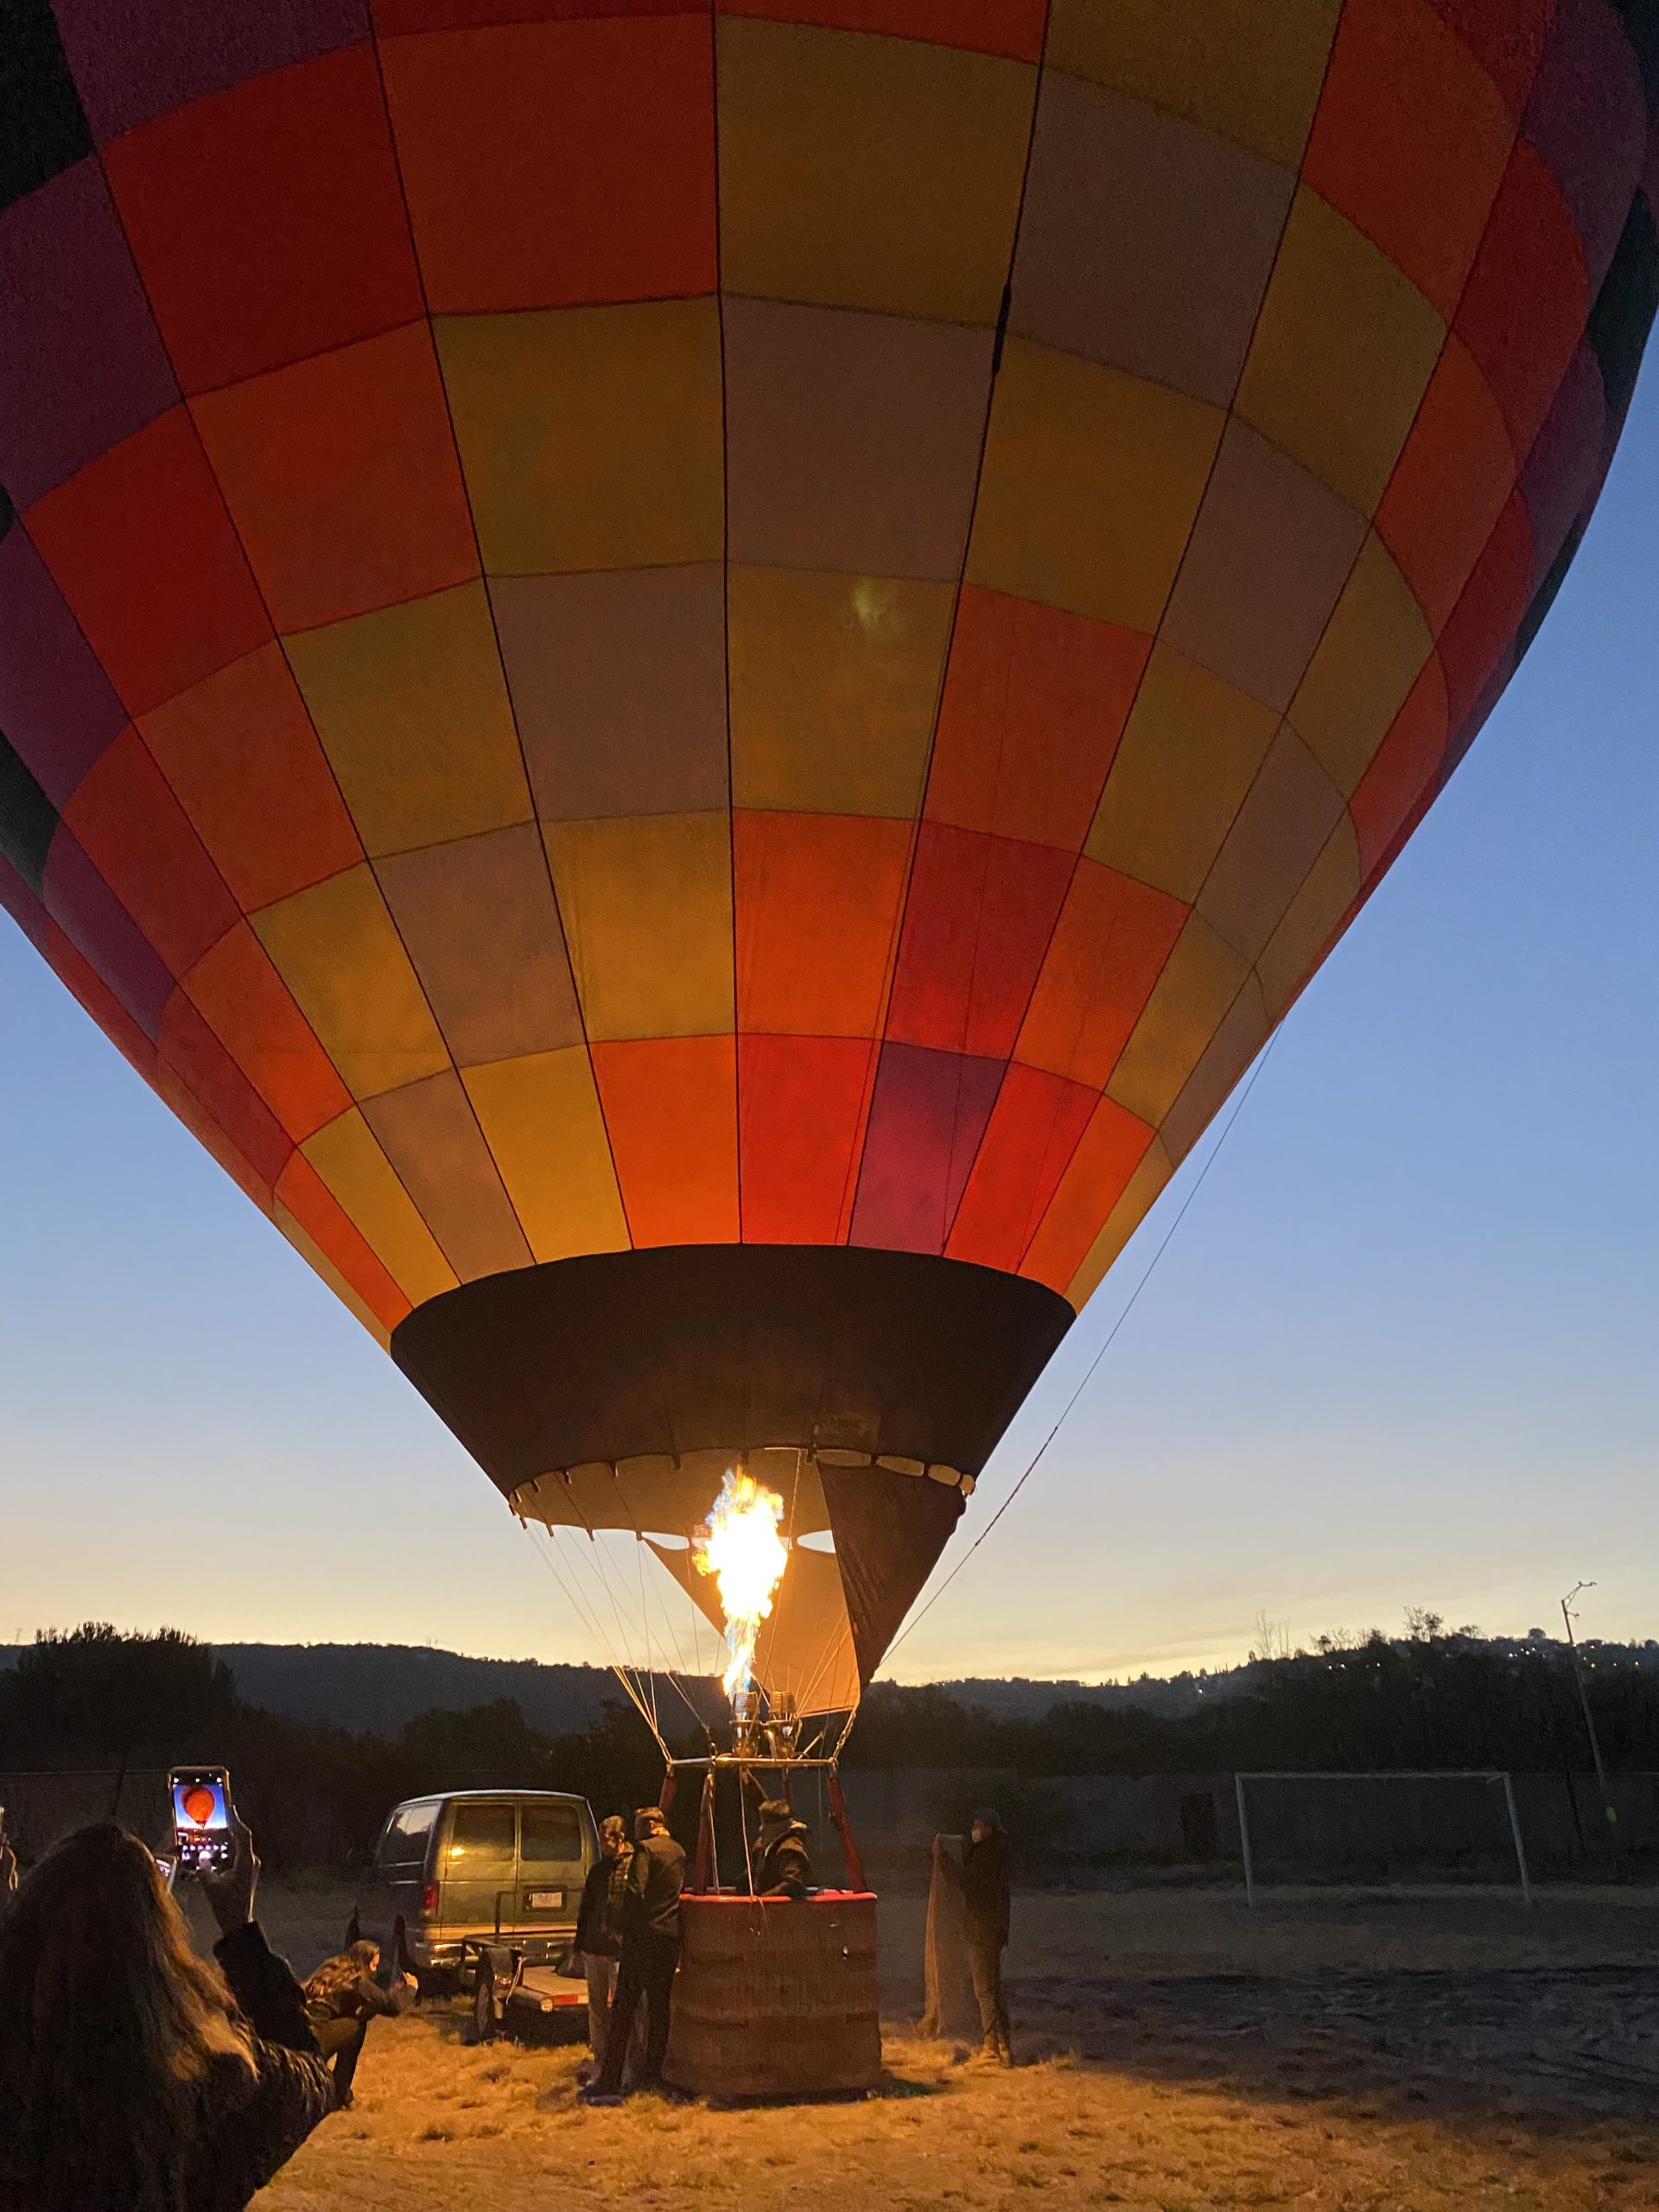 A hot air balloon being filled at dawn in an Miguel de Allende